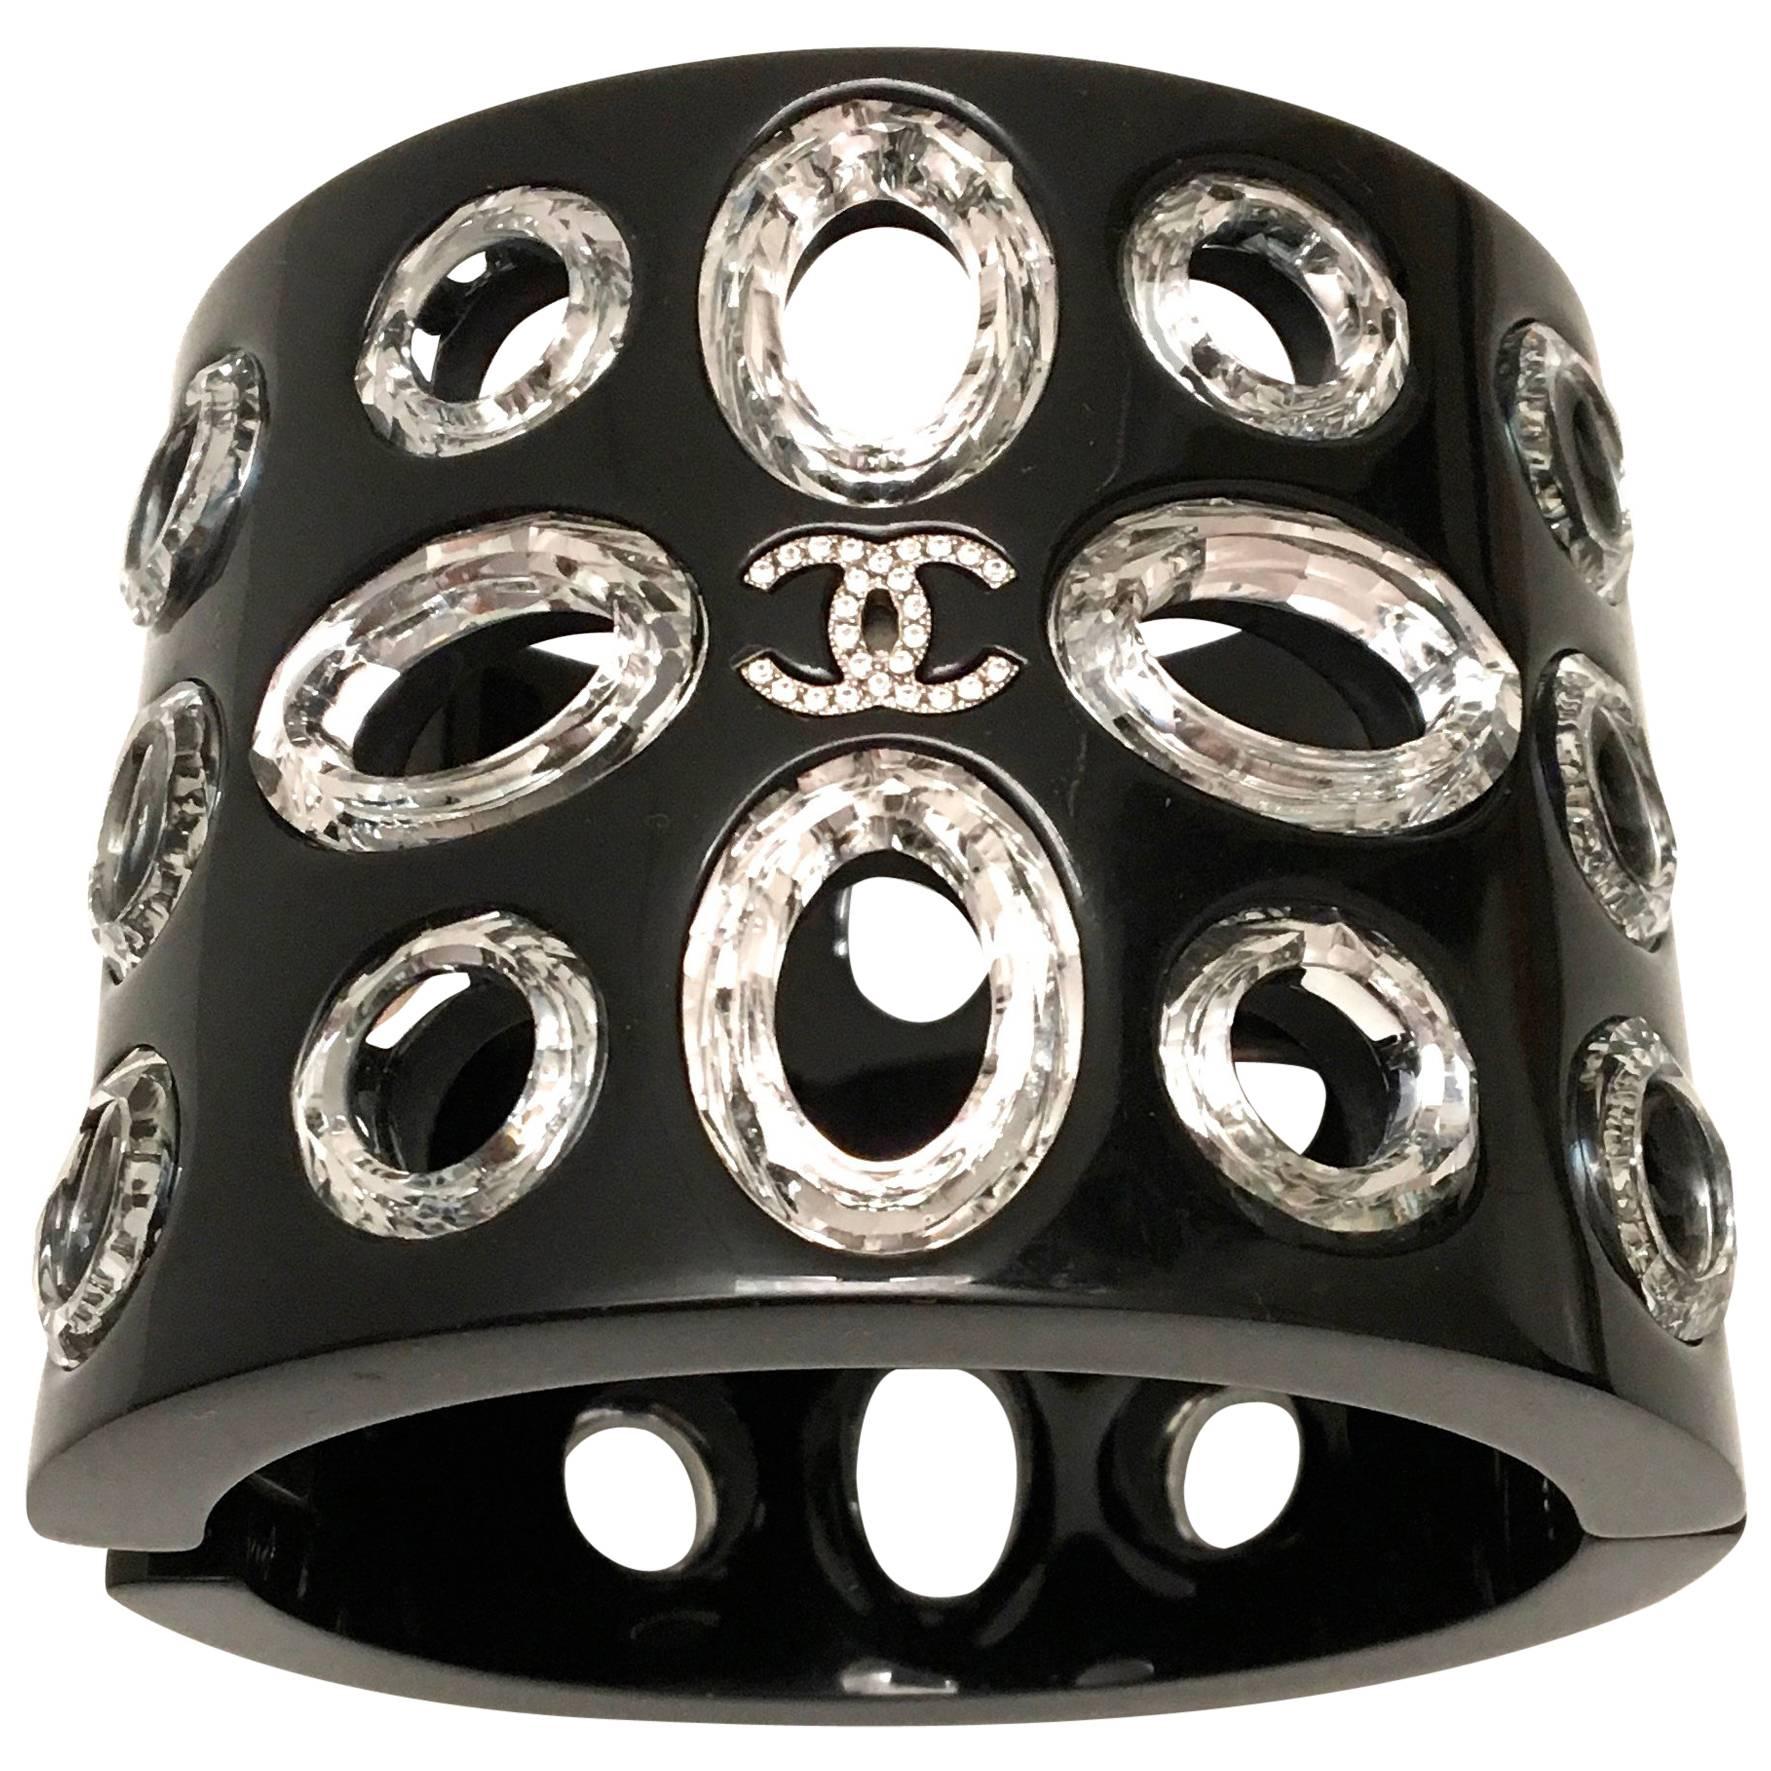 Chanel Cuff Bracelet - Lucite and Swarovski Crystals For Sale